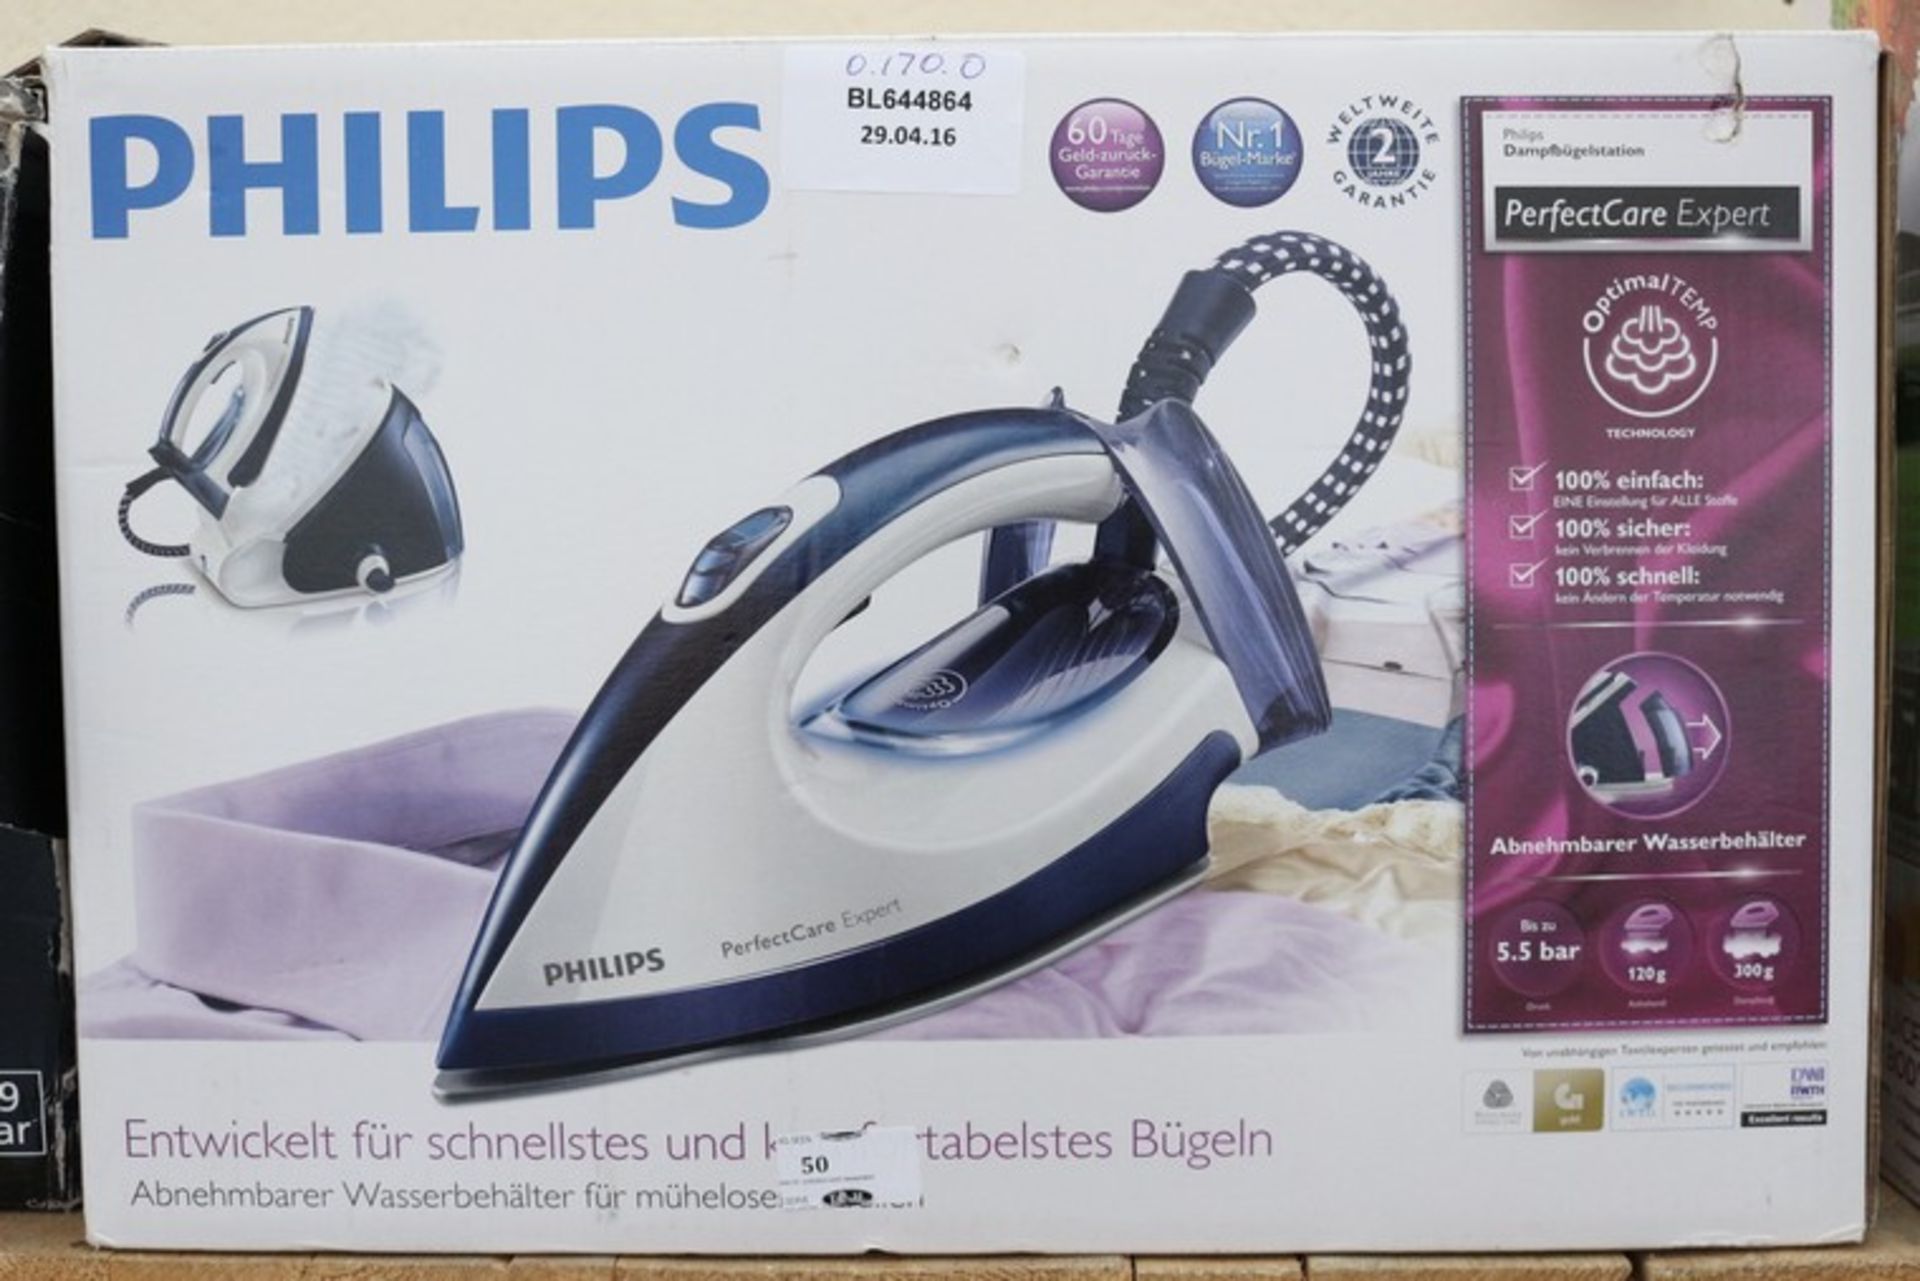 1 x BOXED PHILIPS PERFECT CARE EXPERT STEAM GENERATED IRON RRP £170 (29.4.16) *PLEASE NOTE THAT